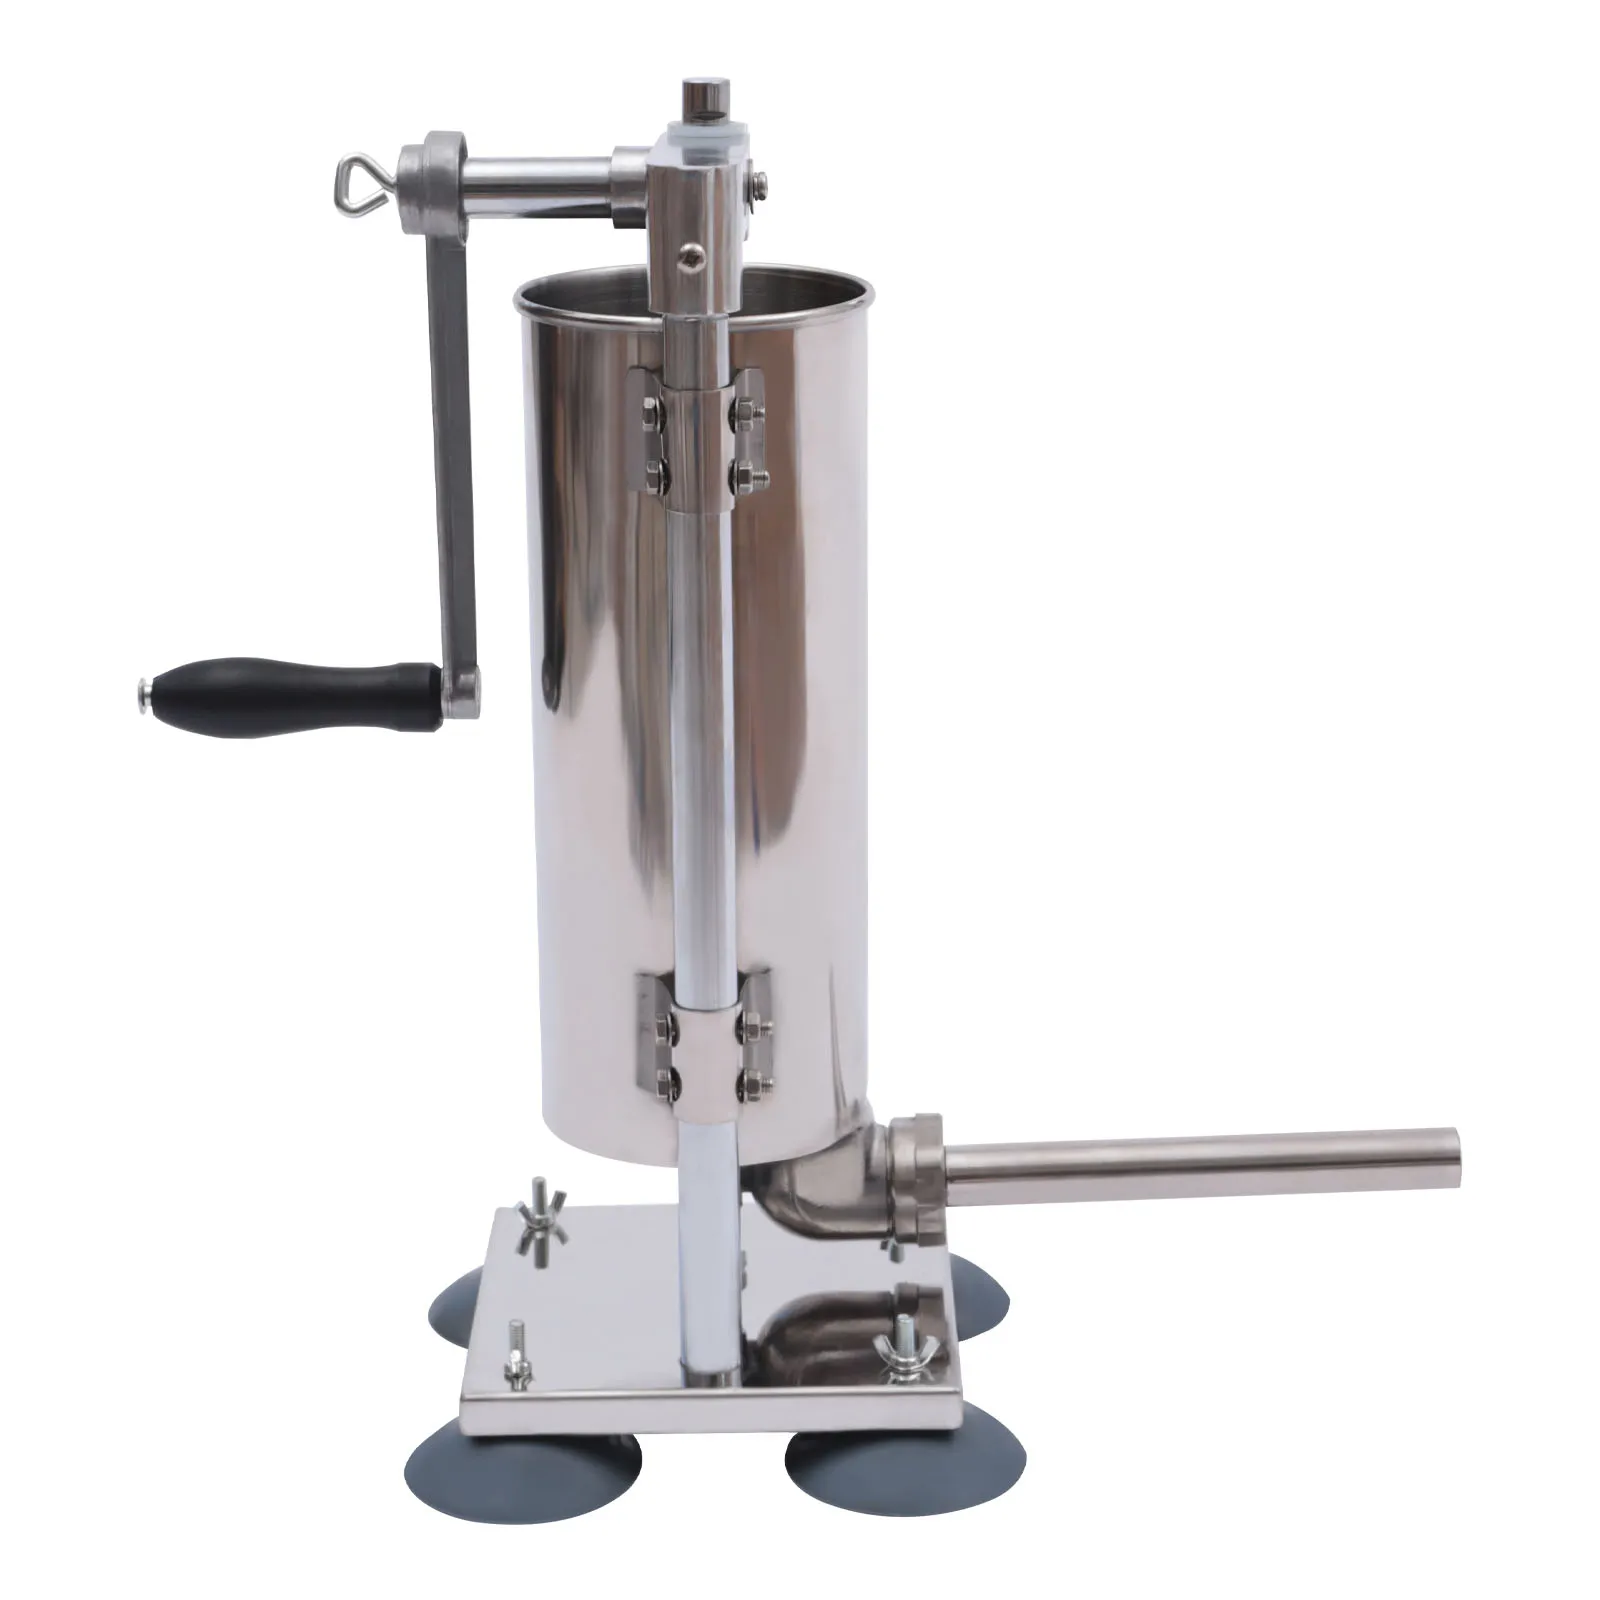 

3L Vertical Manua Stuffer Machine, Stainless Steel Sausage Maker Filling Filler Meat Tools with 8 Stuffing Tube